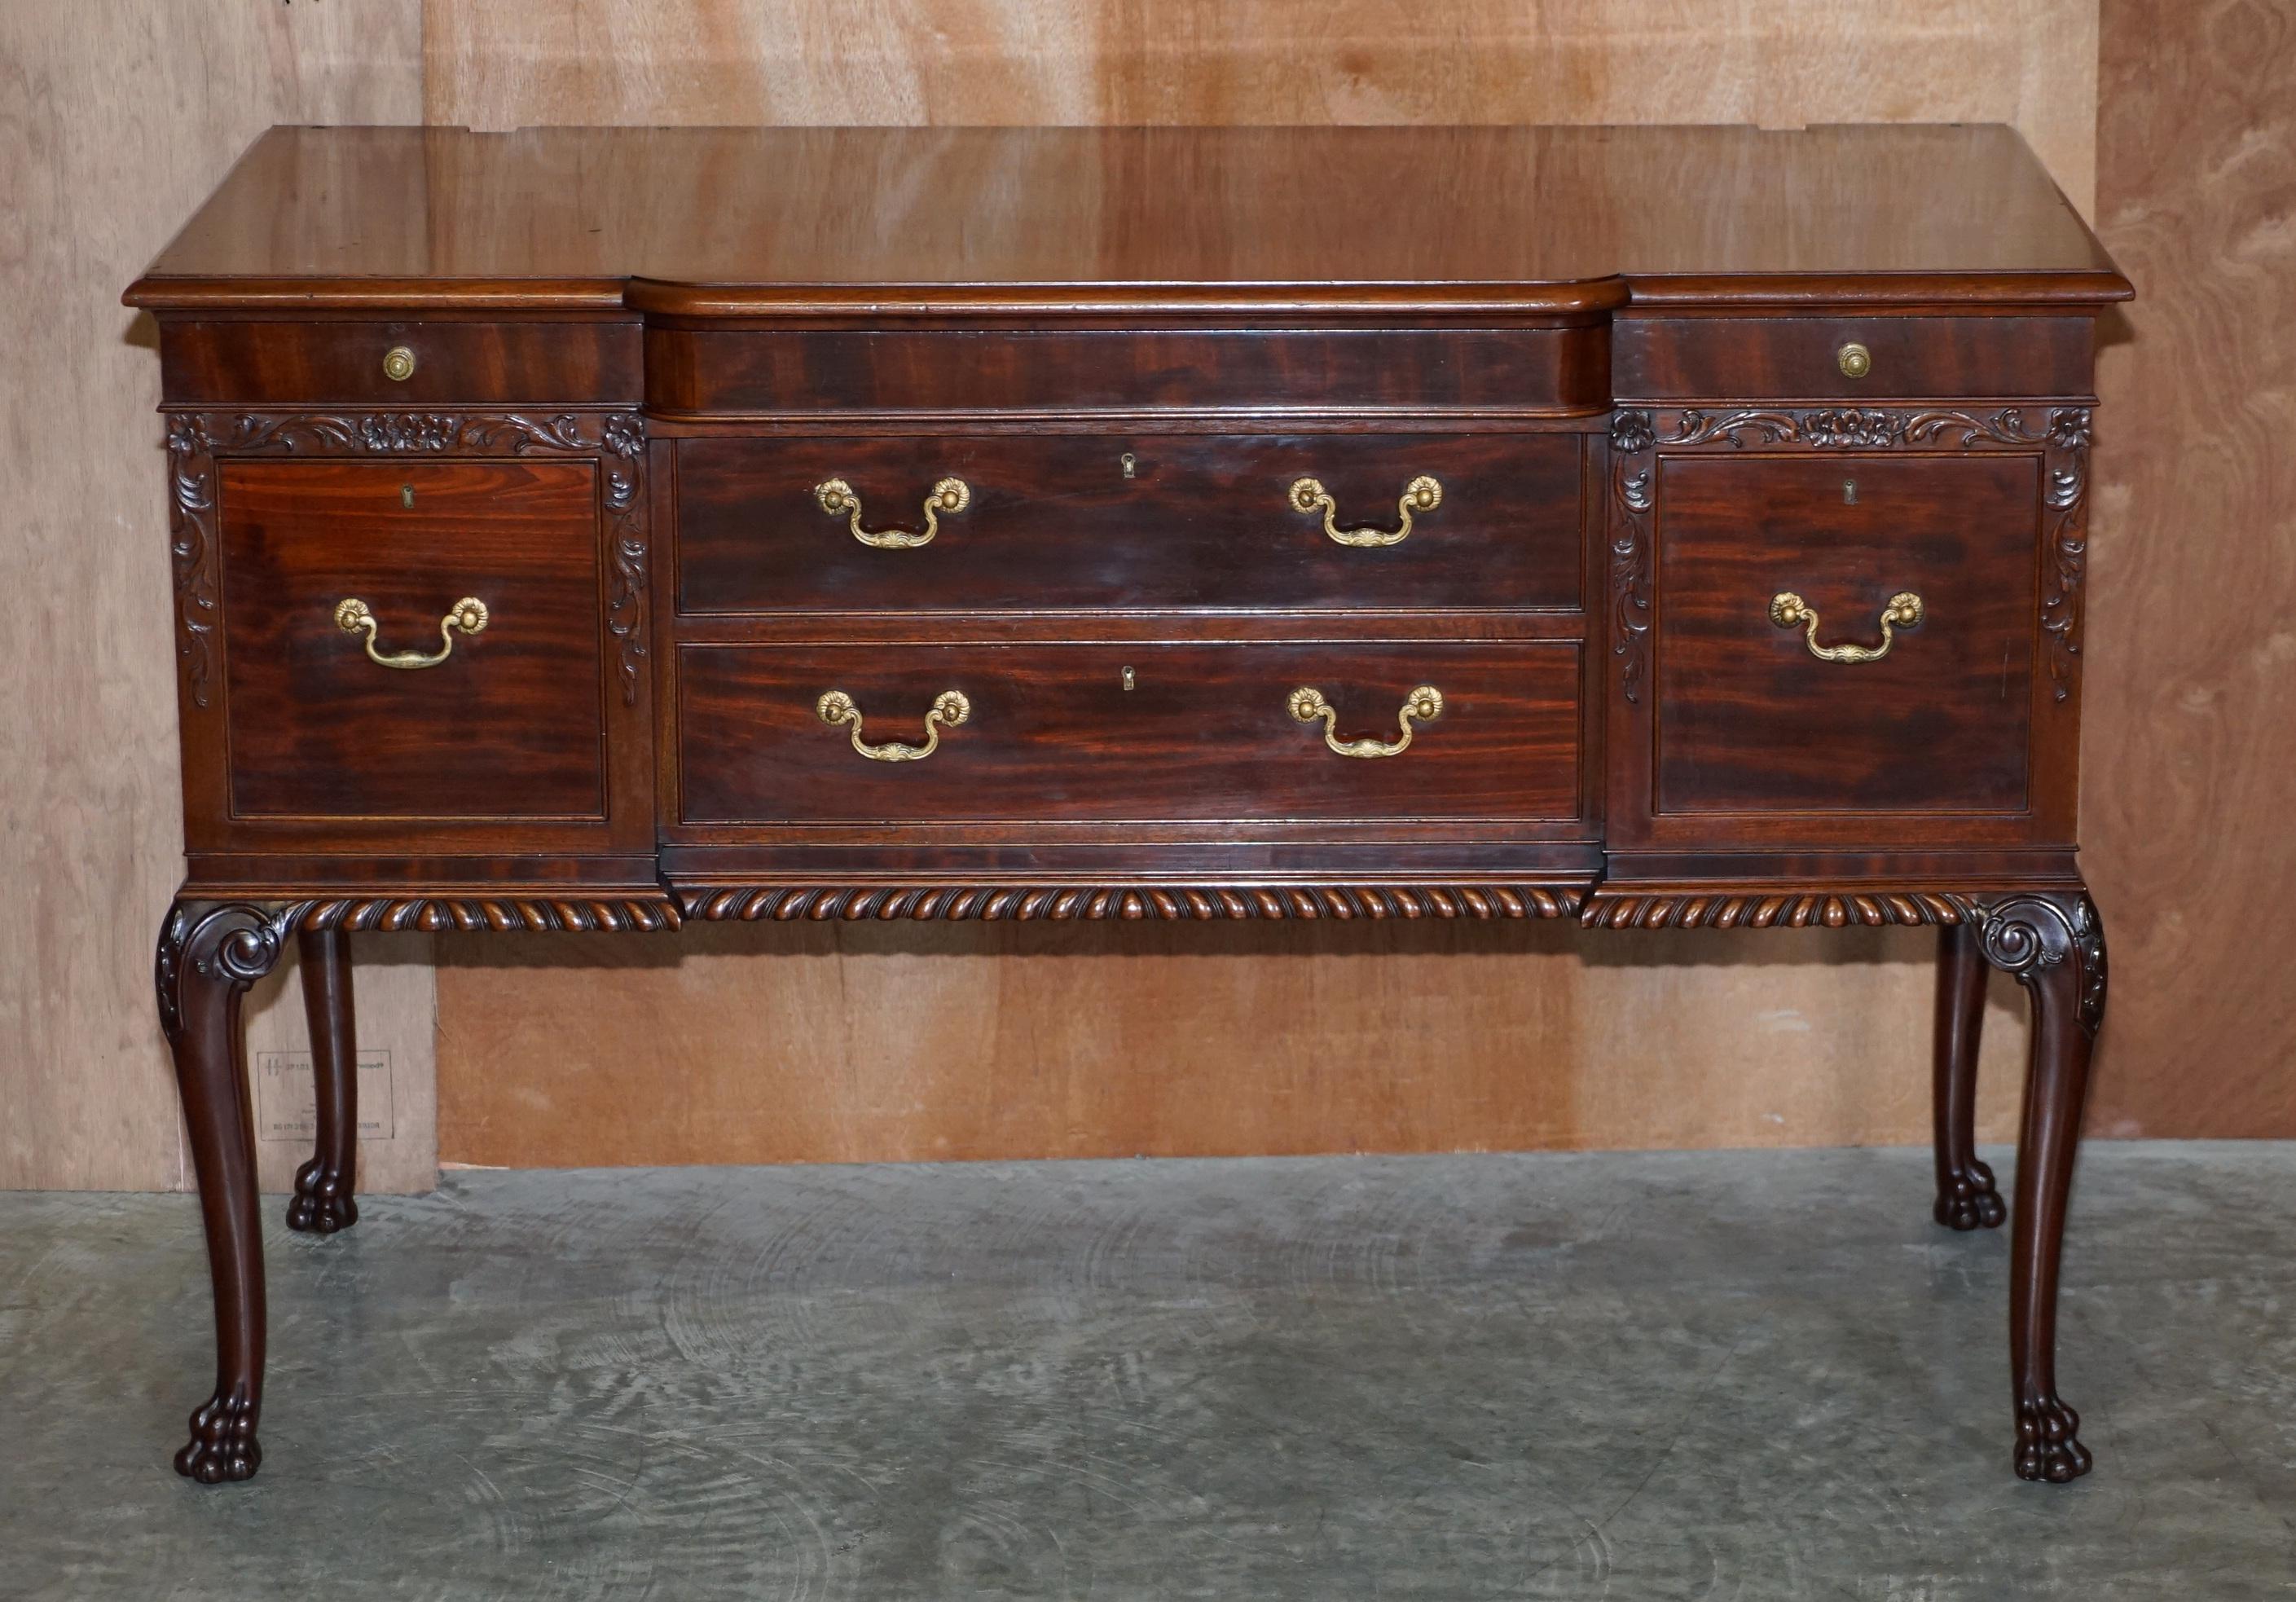 We are delighted to offer for sale this exquisite quality circa 1900 Honduras Mahogany dressing or vanity table with lion hairy paw feet

This piece is part of a large suite, I have in total a pair of occasional chairs, a large triple bank